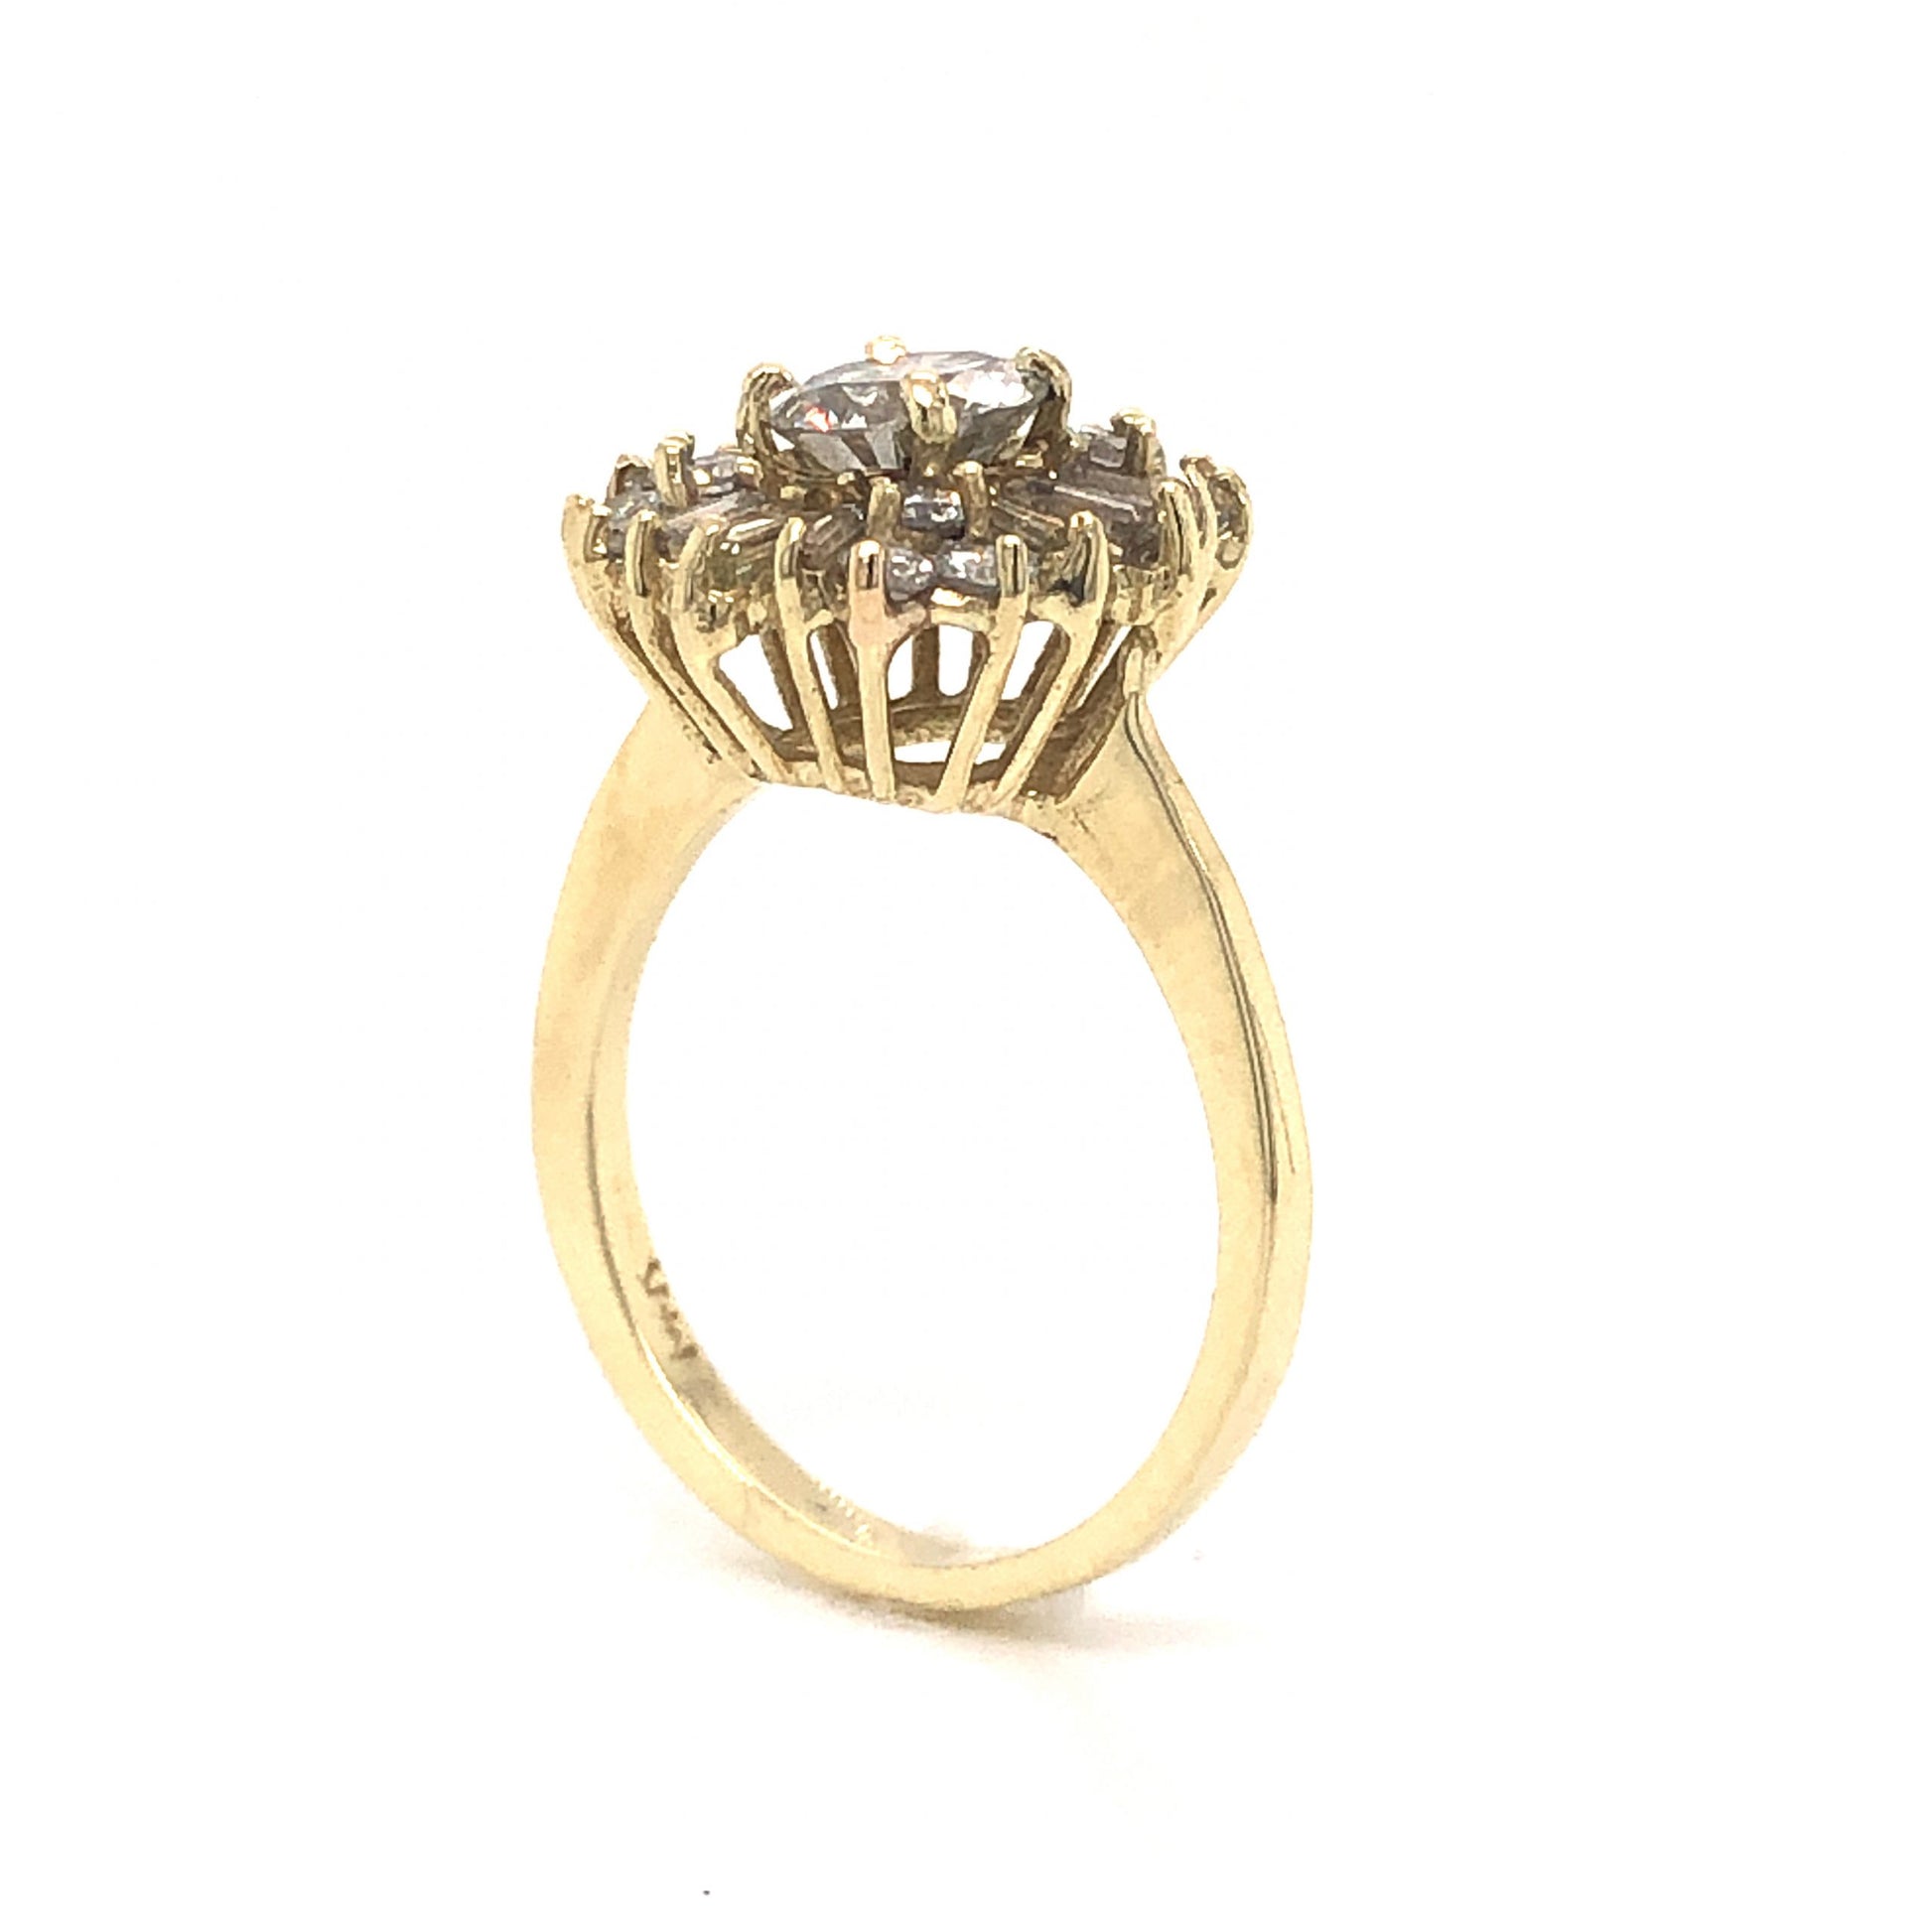 Round Ballerina Halo Diamond Engagement Ring in 14k Yellow GoldComposition: 14 Karat Yellow Gold Ring Size: 5 Total Diamond Weight: 1.46ct Total Gram Weight: 3.88 g Inscription: 14k
      